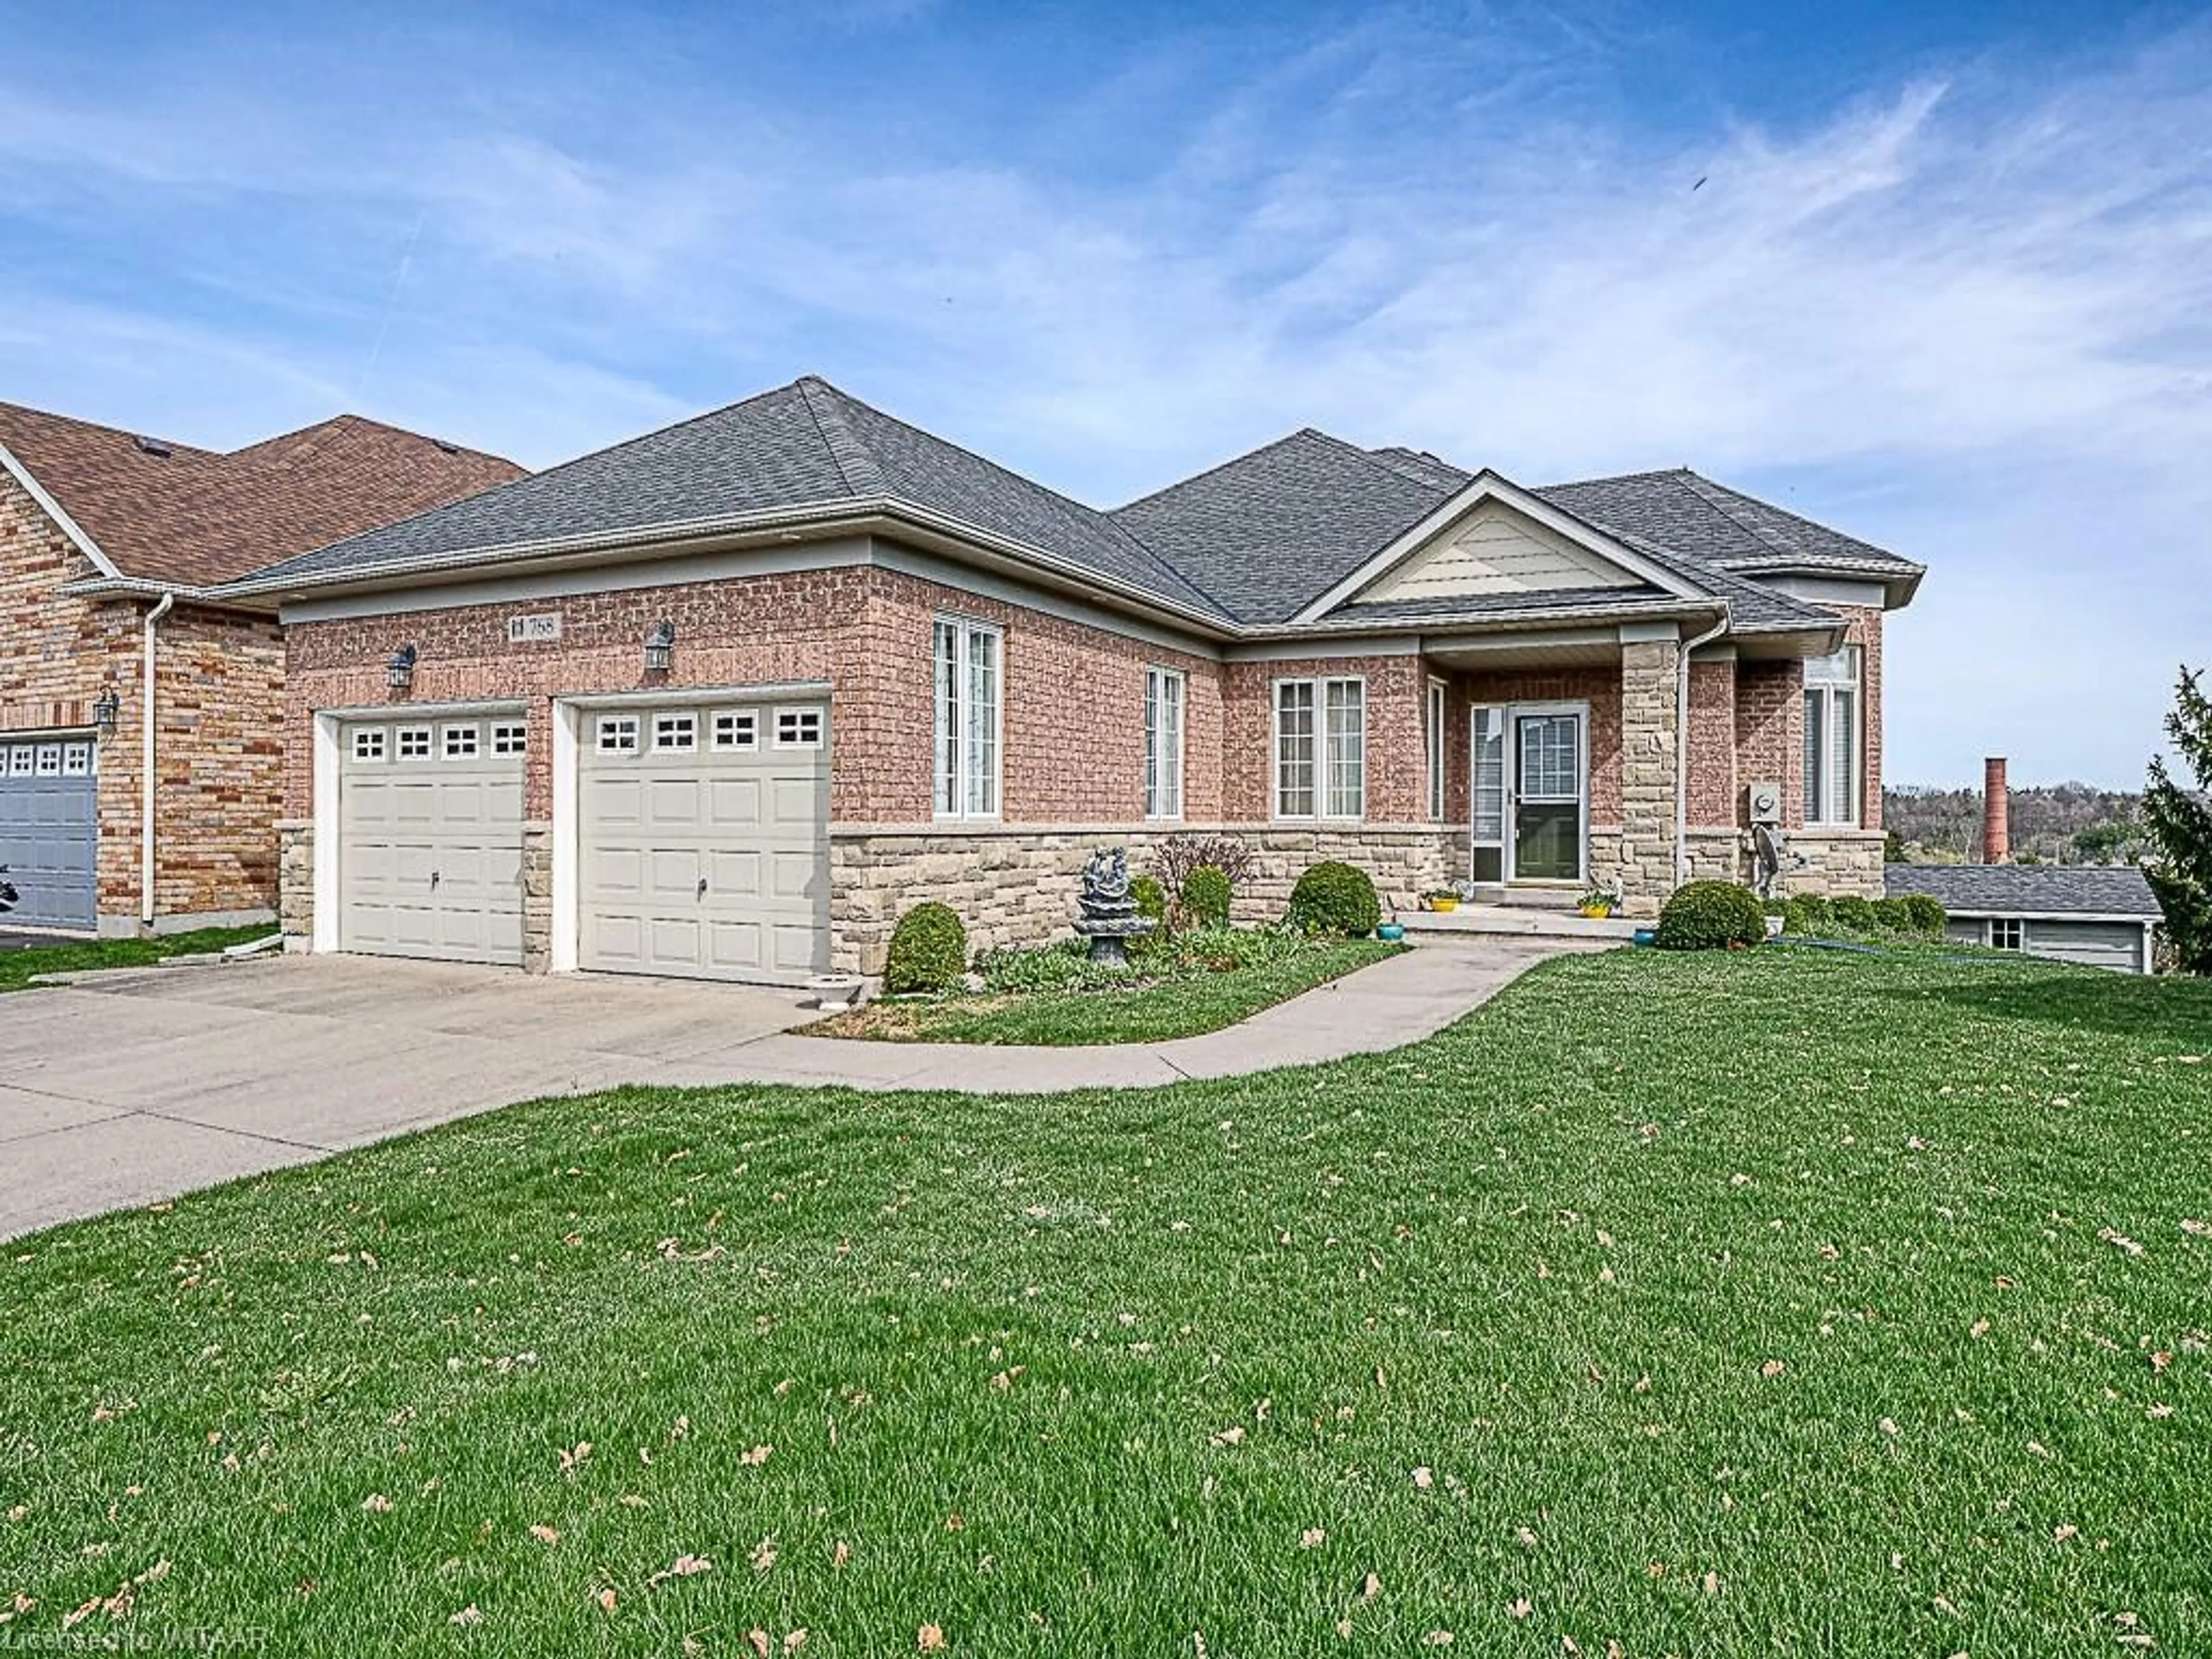 Home with brick exterior material for 768 Garden Court Cres, Woodstock Ontario N4T 0A3